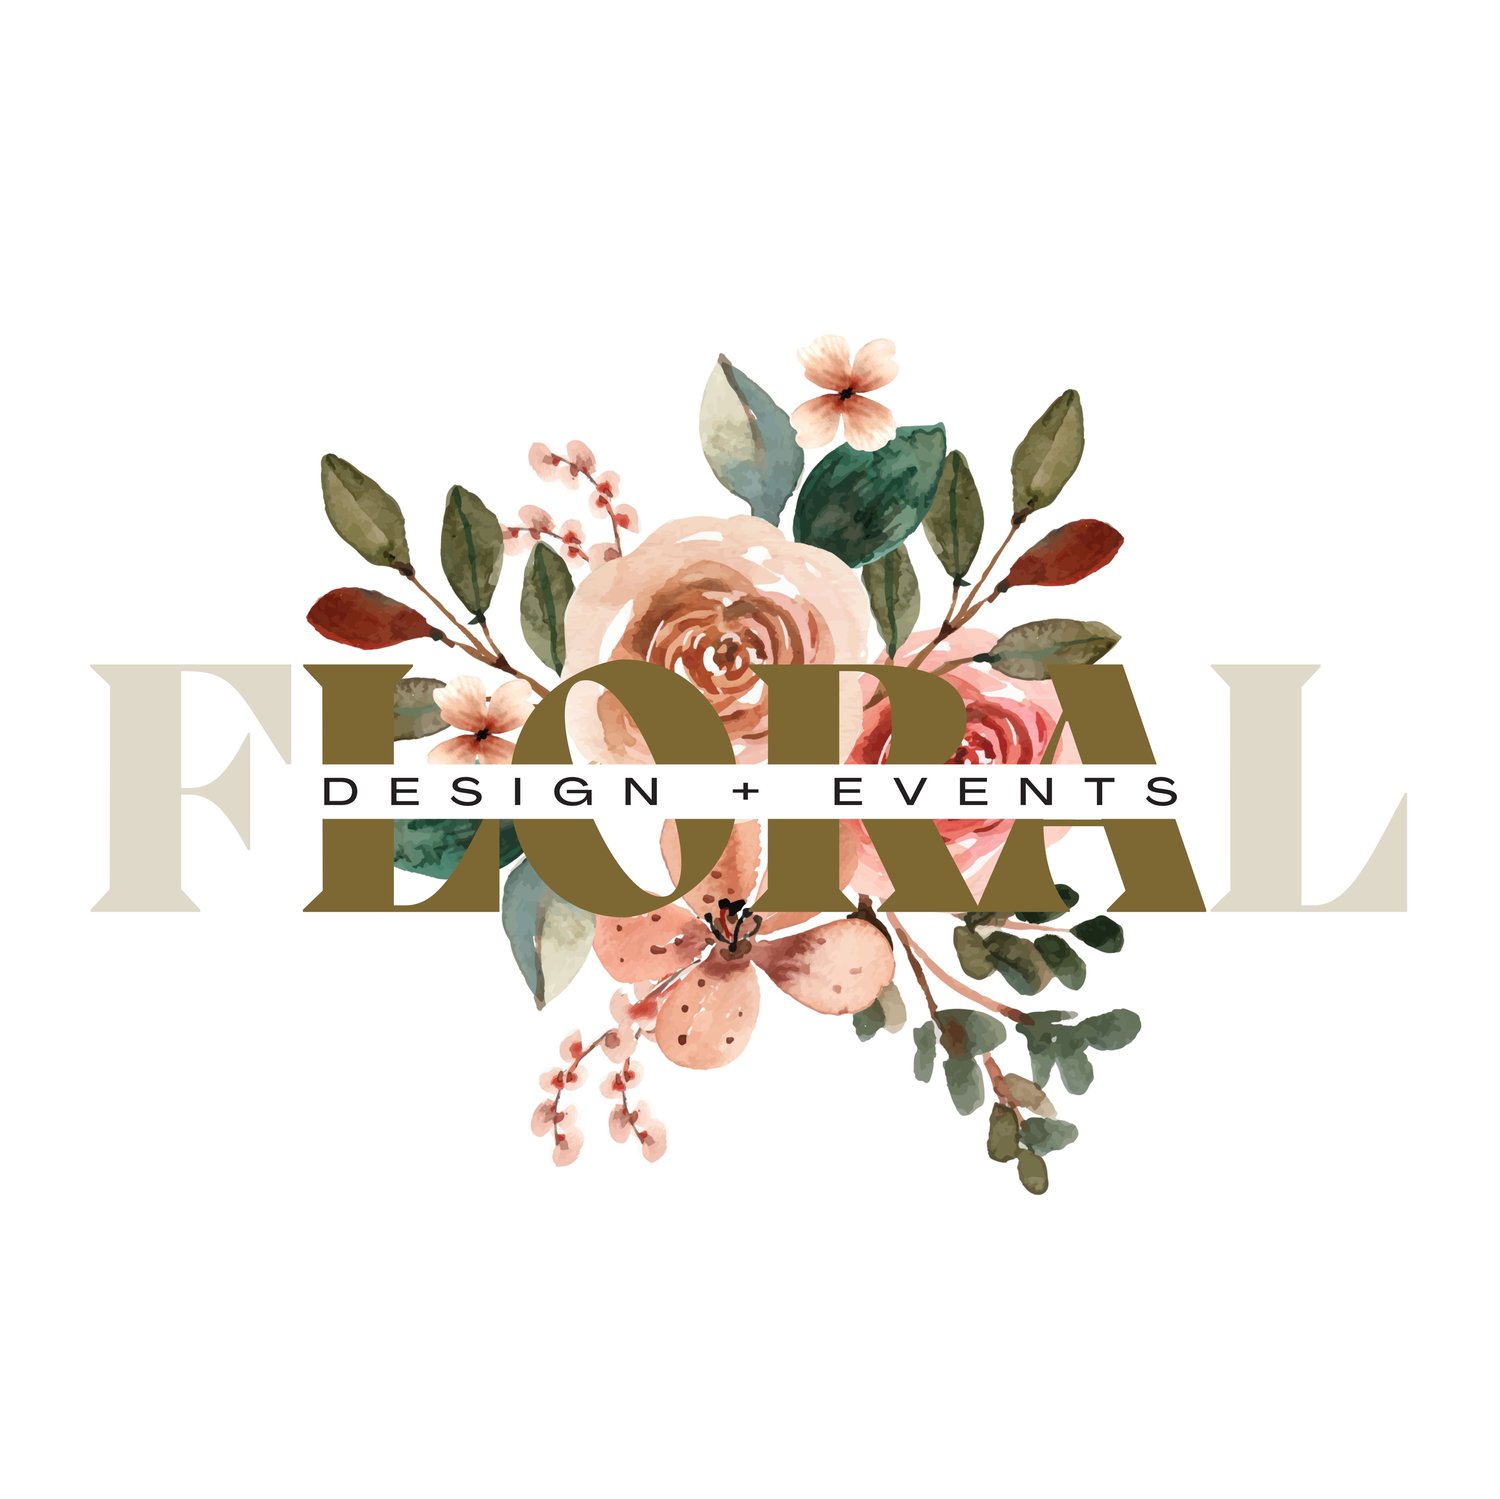 Lora Floral and Events